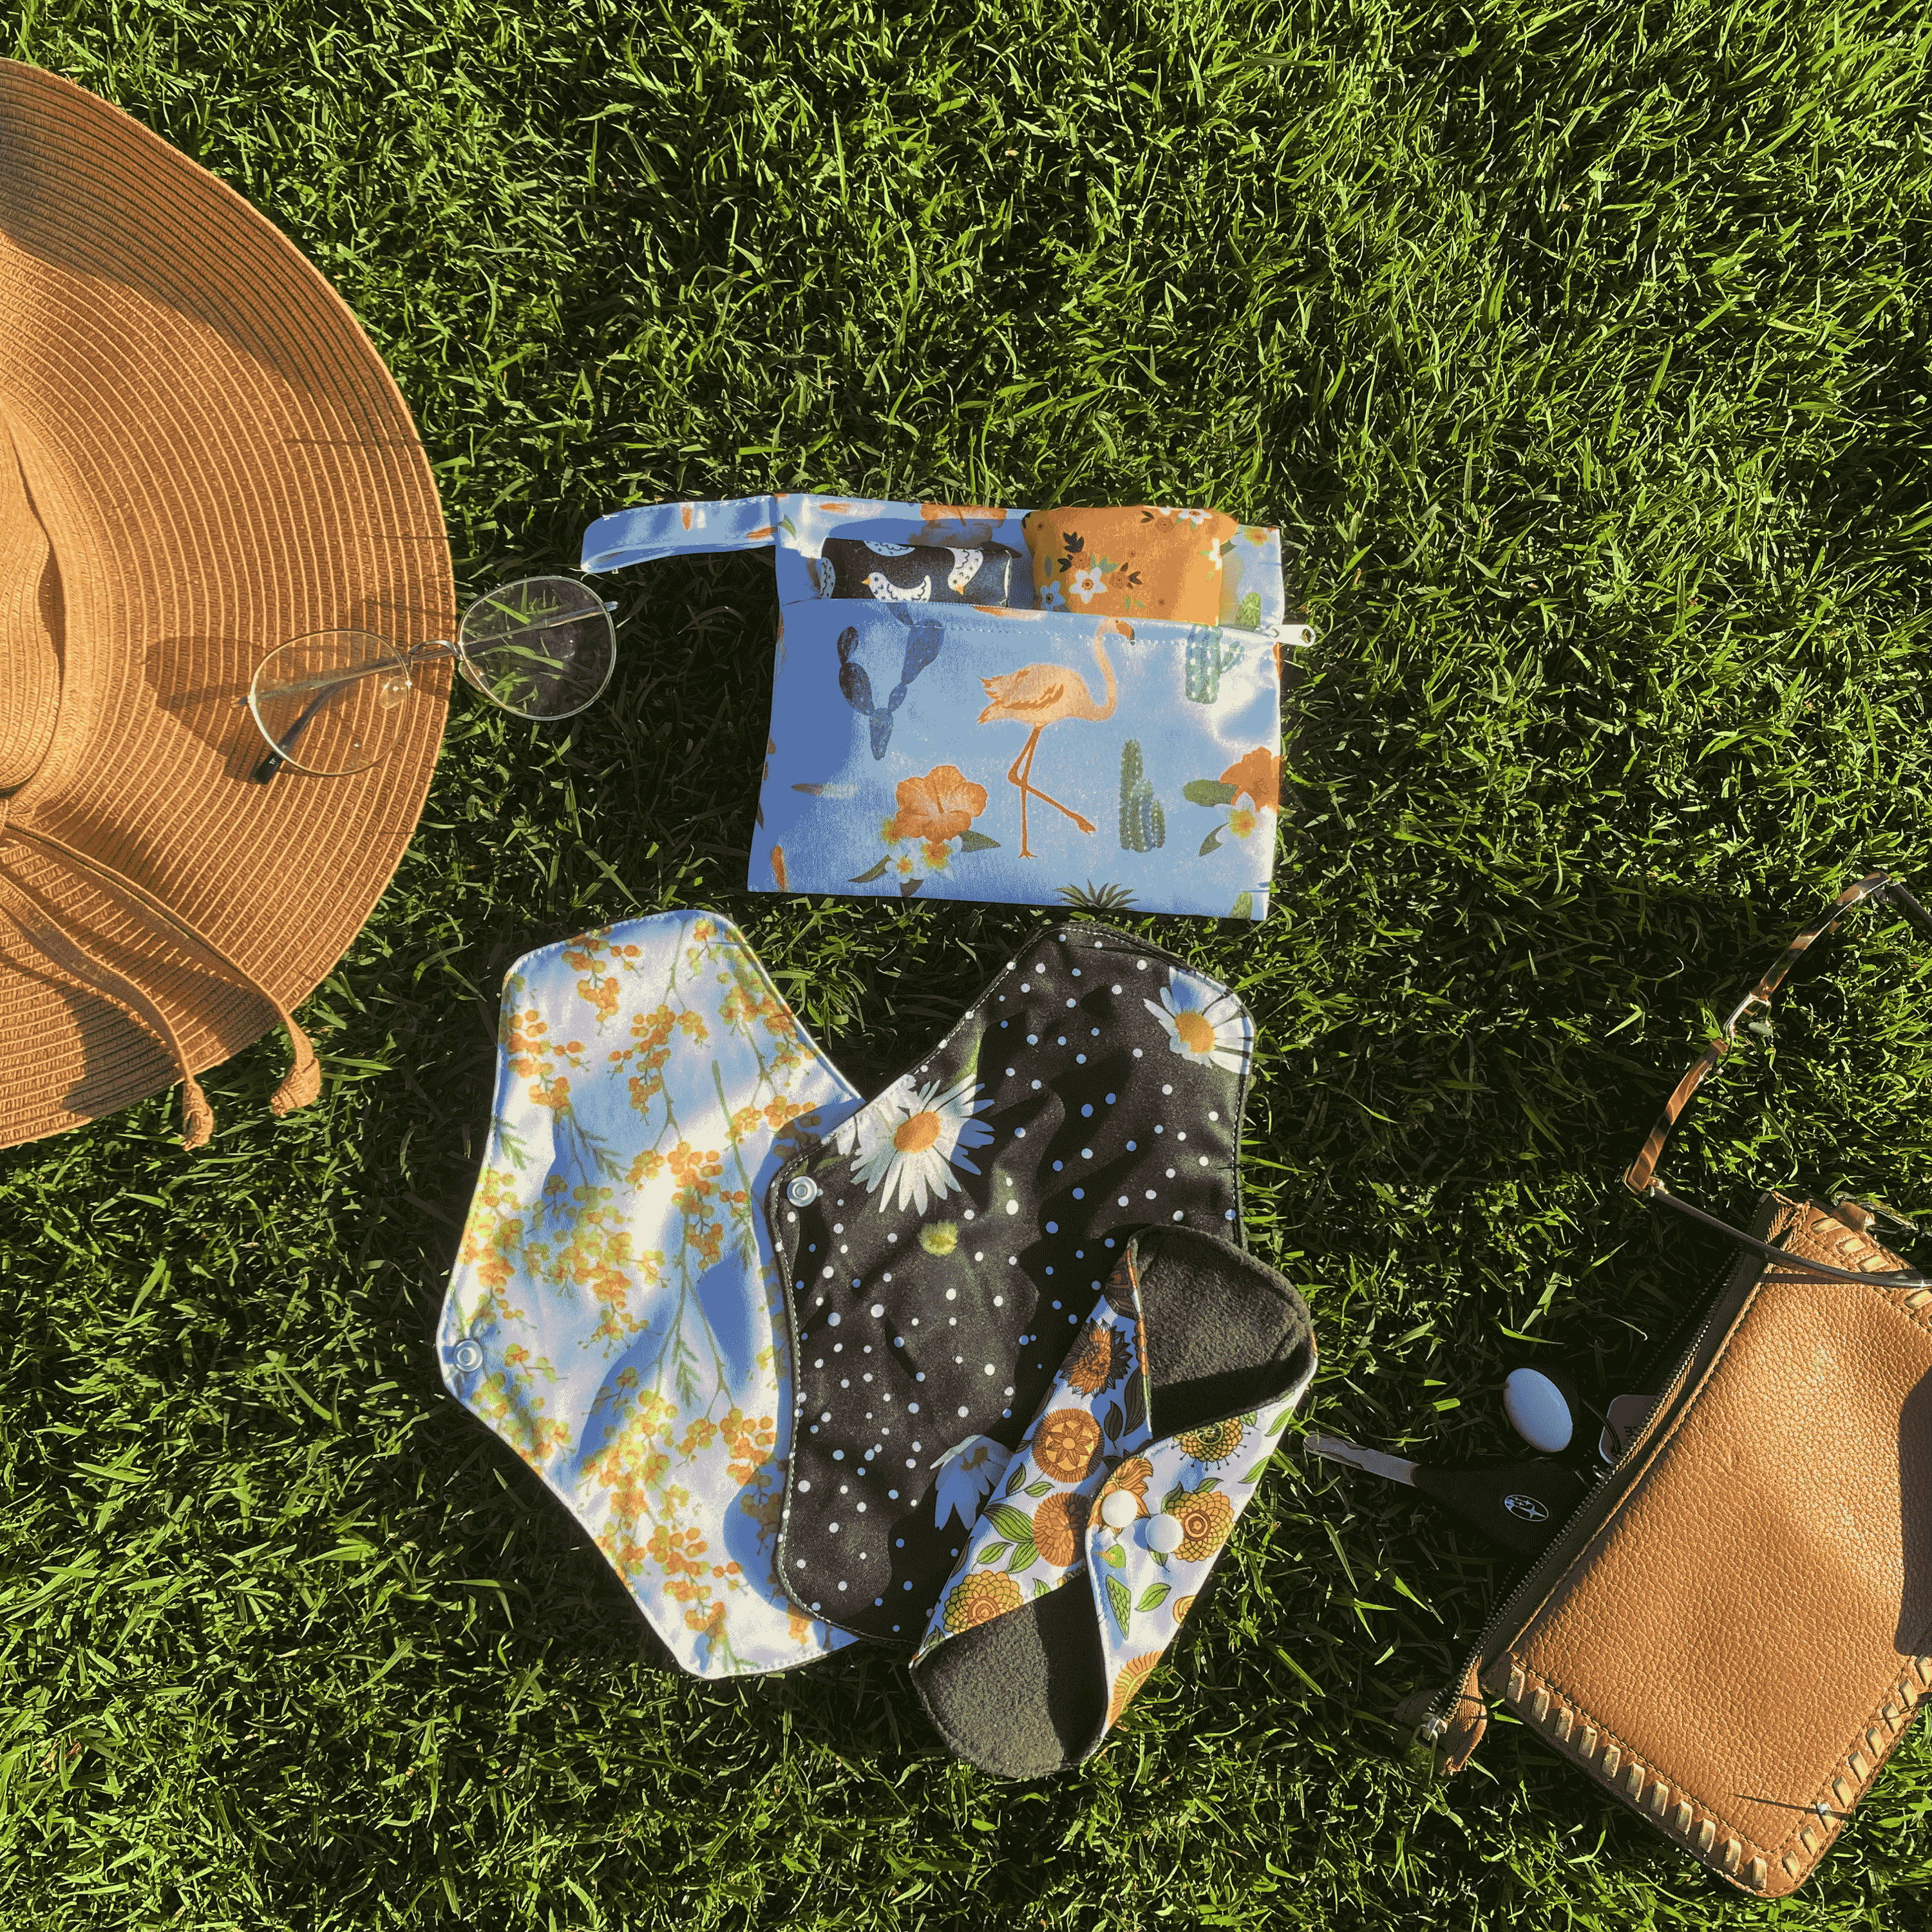 Flow Co.'s Reusable Period Pads in patterns Bellis, Bloom, and Caribe